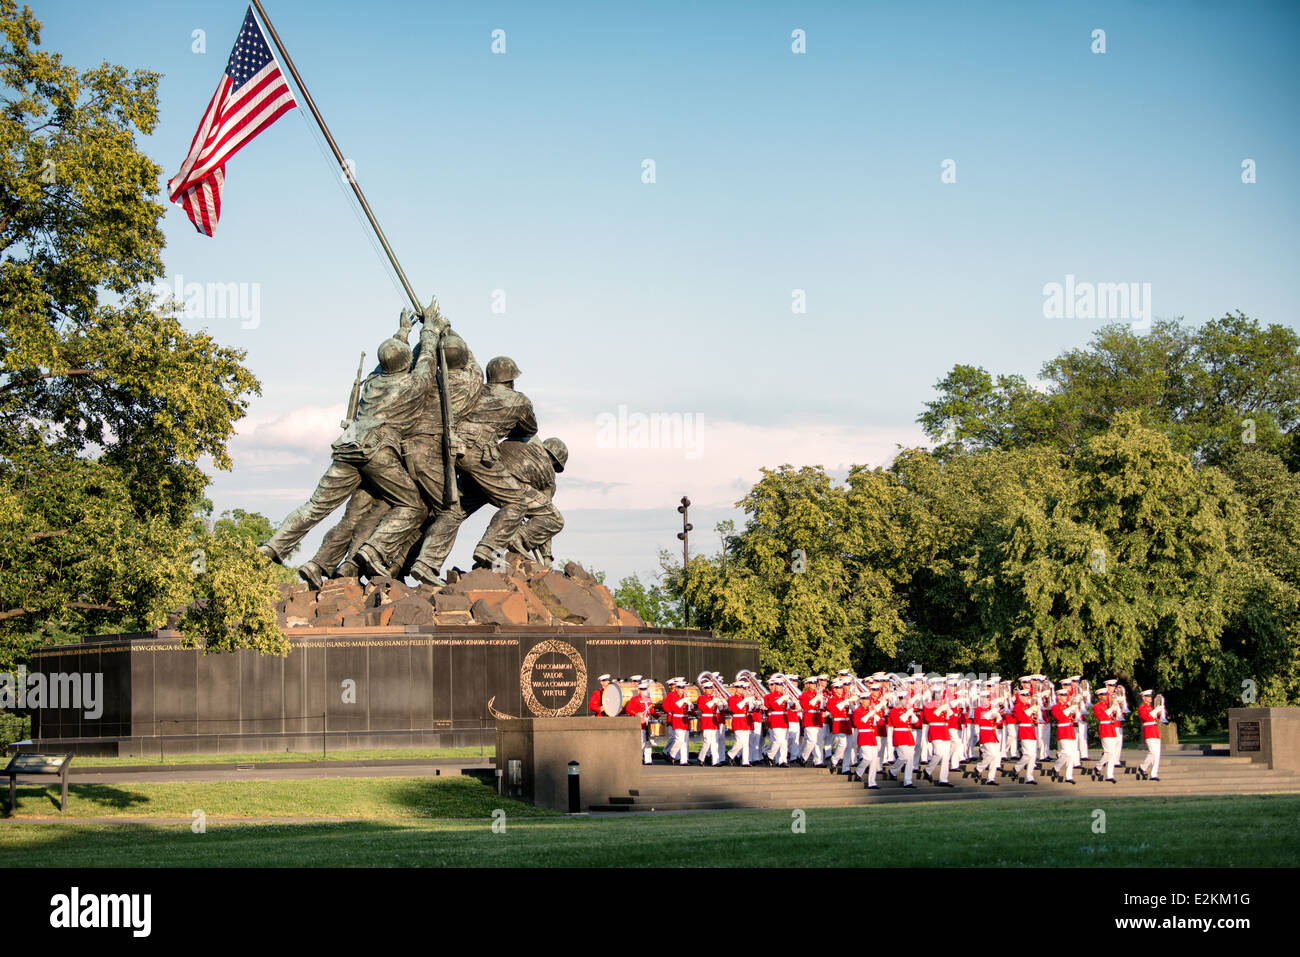 The United States Marine Drum and Bugle Corps, known as the Commandant's Own, performs at the Sunset Parade at the Iwo Jima Memorial in Arlington, Virginia, next to Arlington National Cemetery. Stock Photo